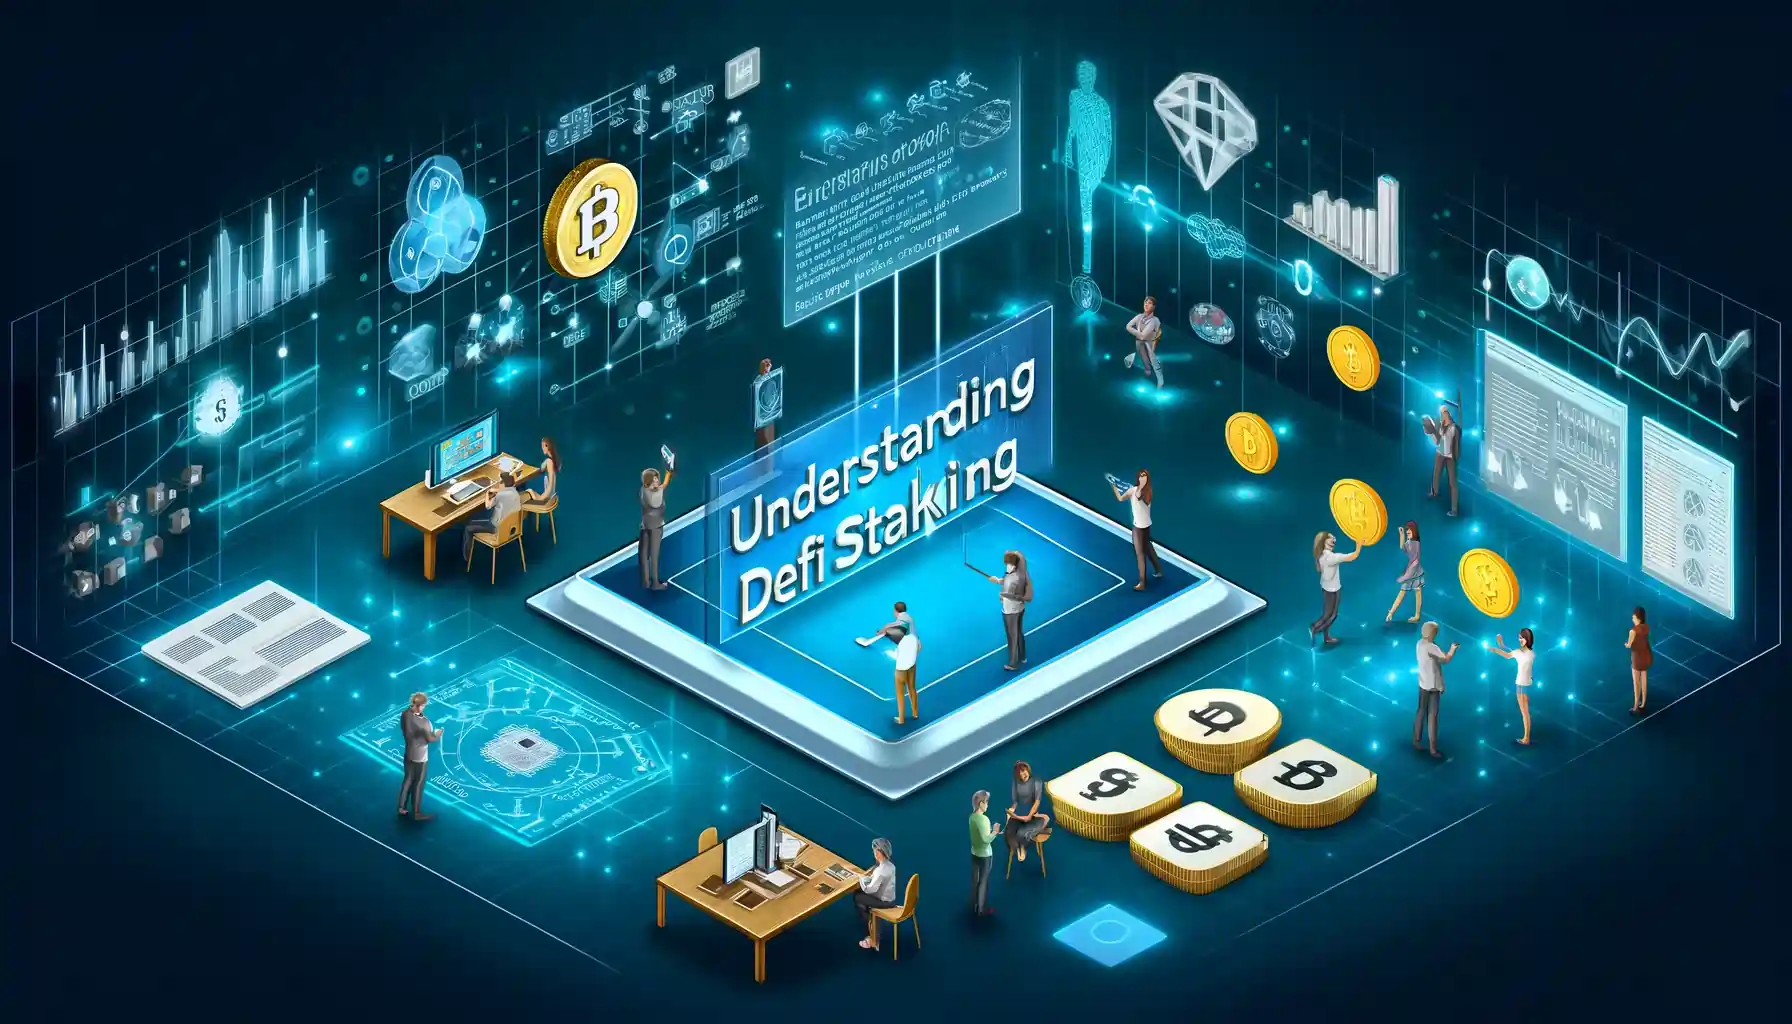 What is a defi staking platform